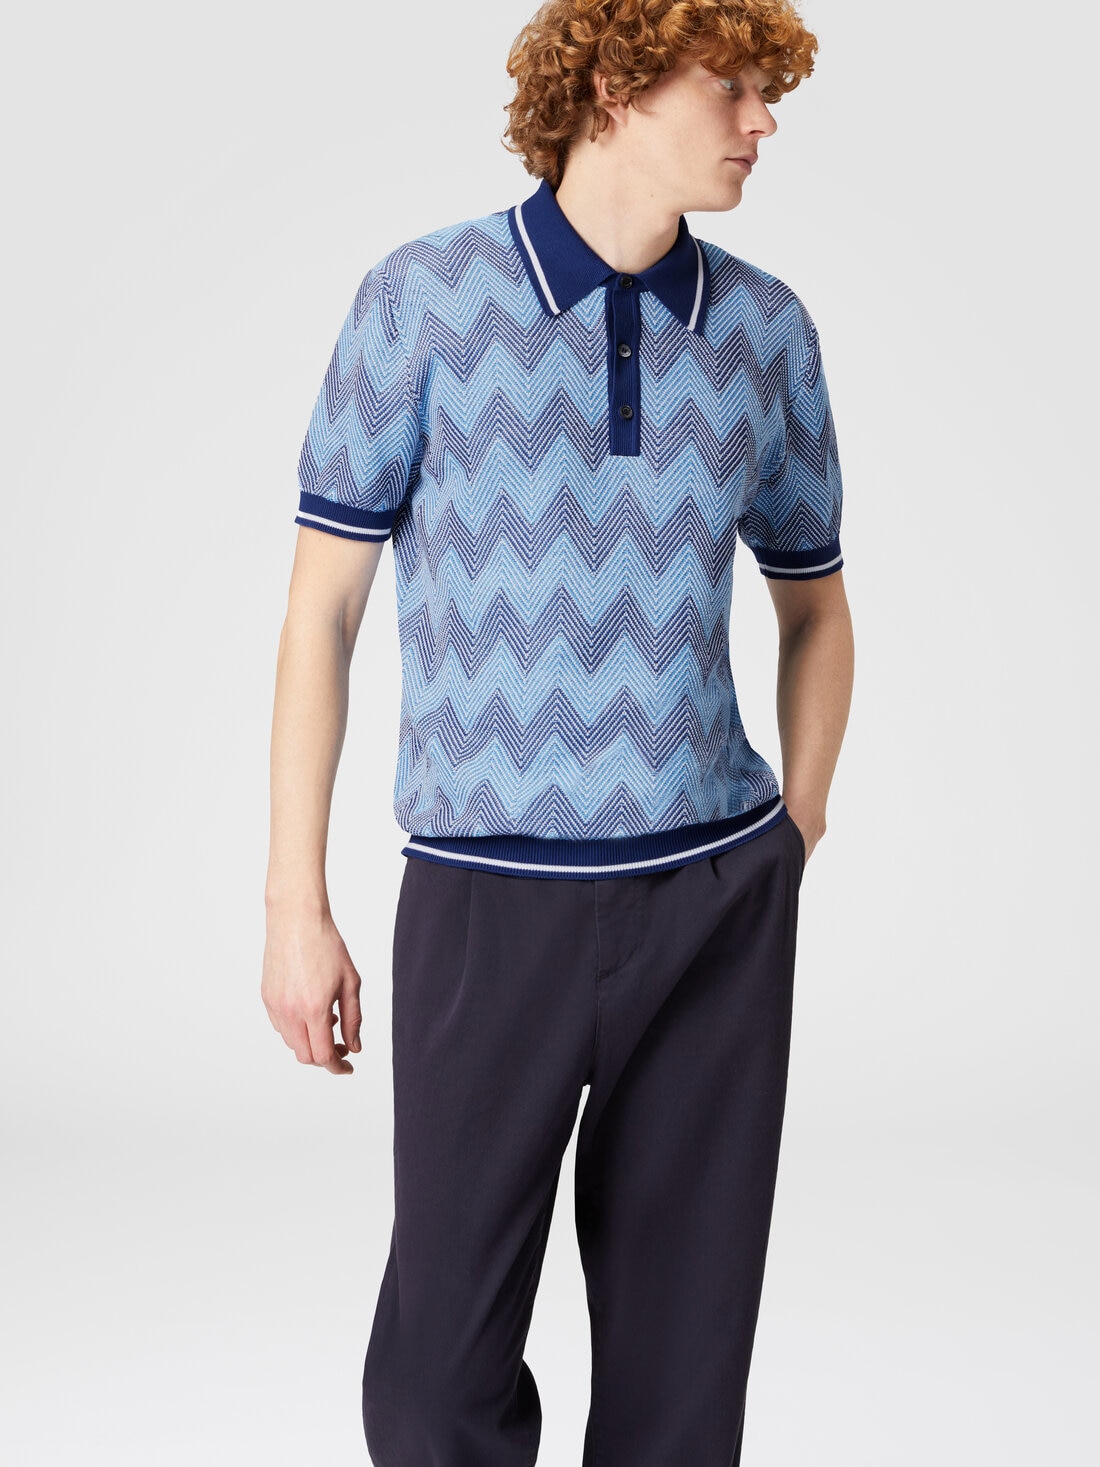 Short-sleeved polo shirt in zigzag cotton with contrasting trim, Blue - US24S209BK034YS72F8 - 3